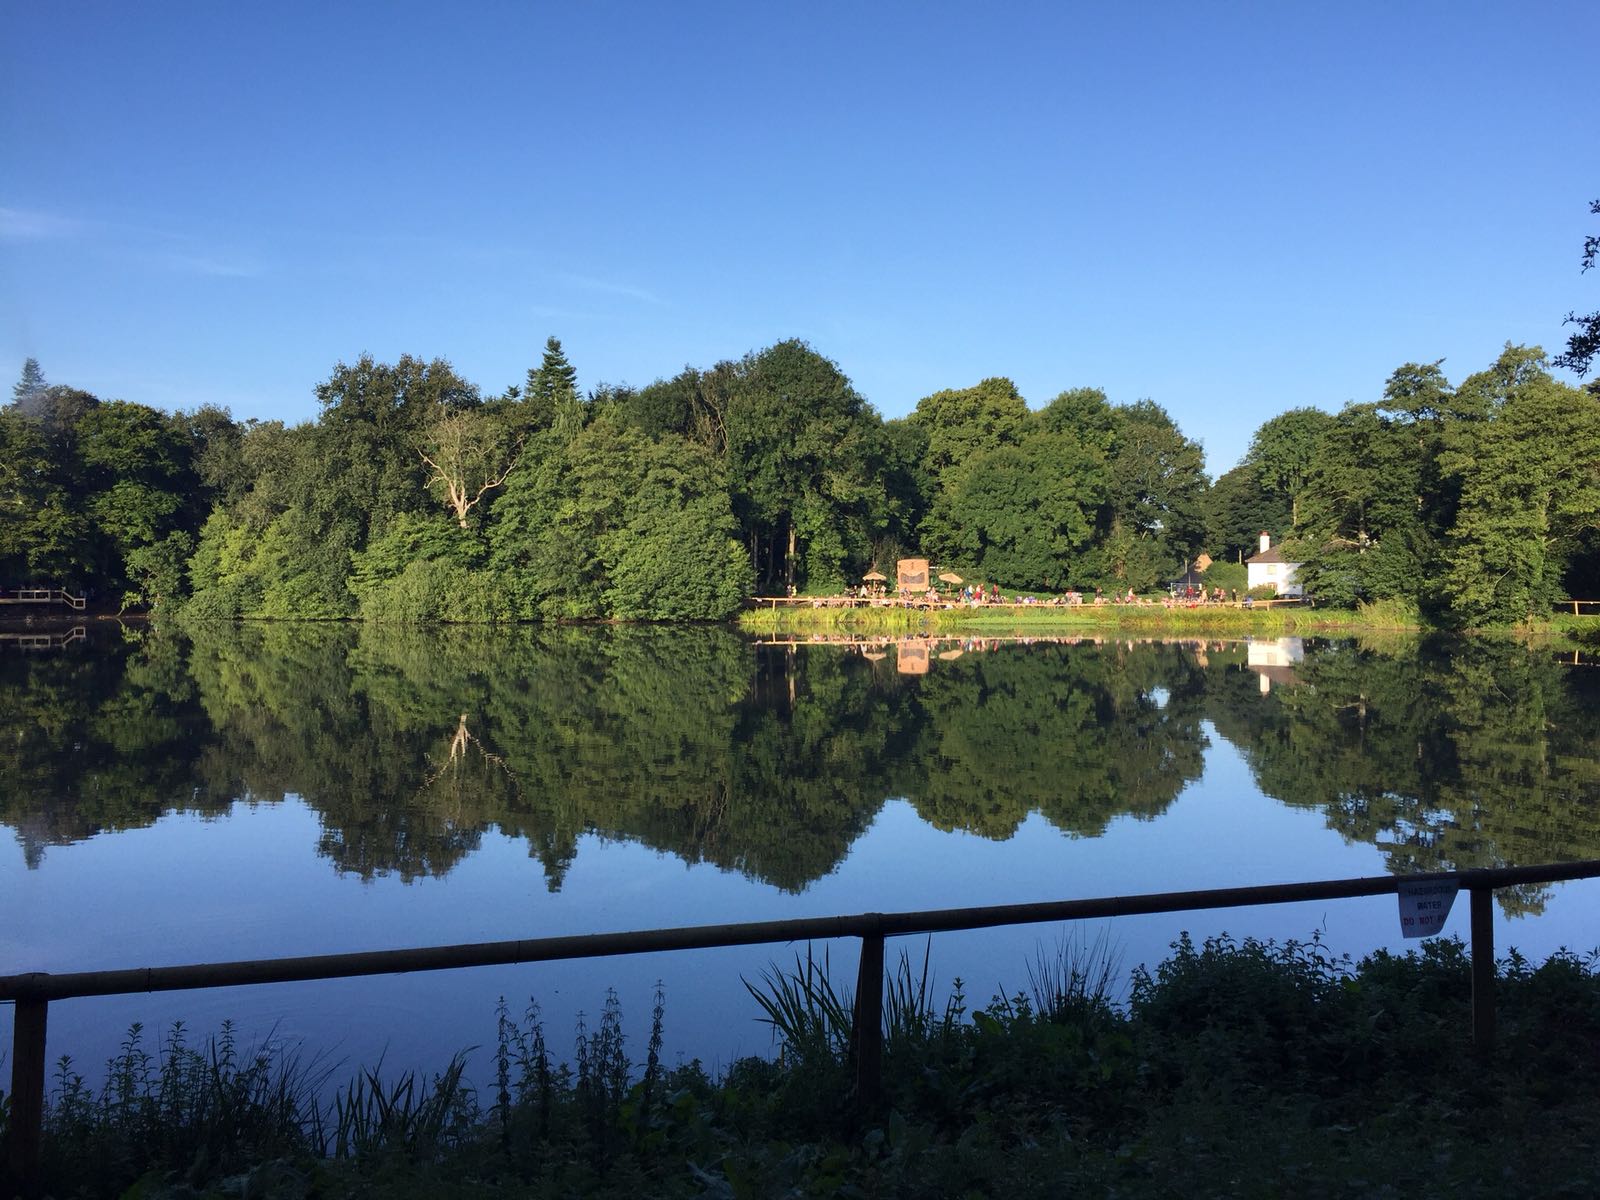 The beautiful Houghton Festival site. Image: Lucy Carlile